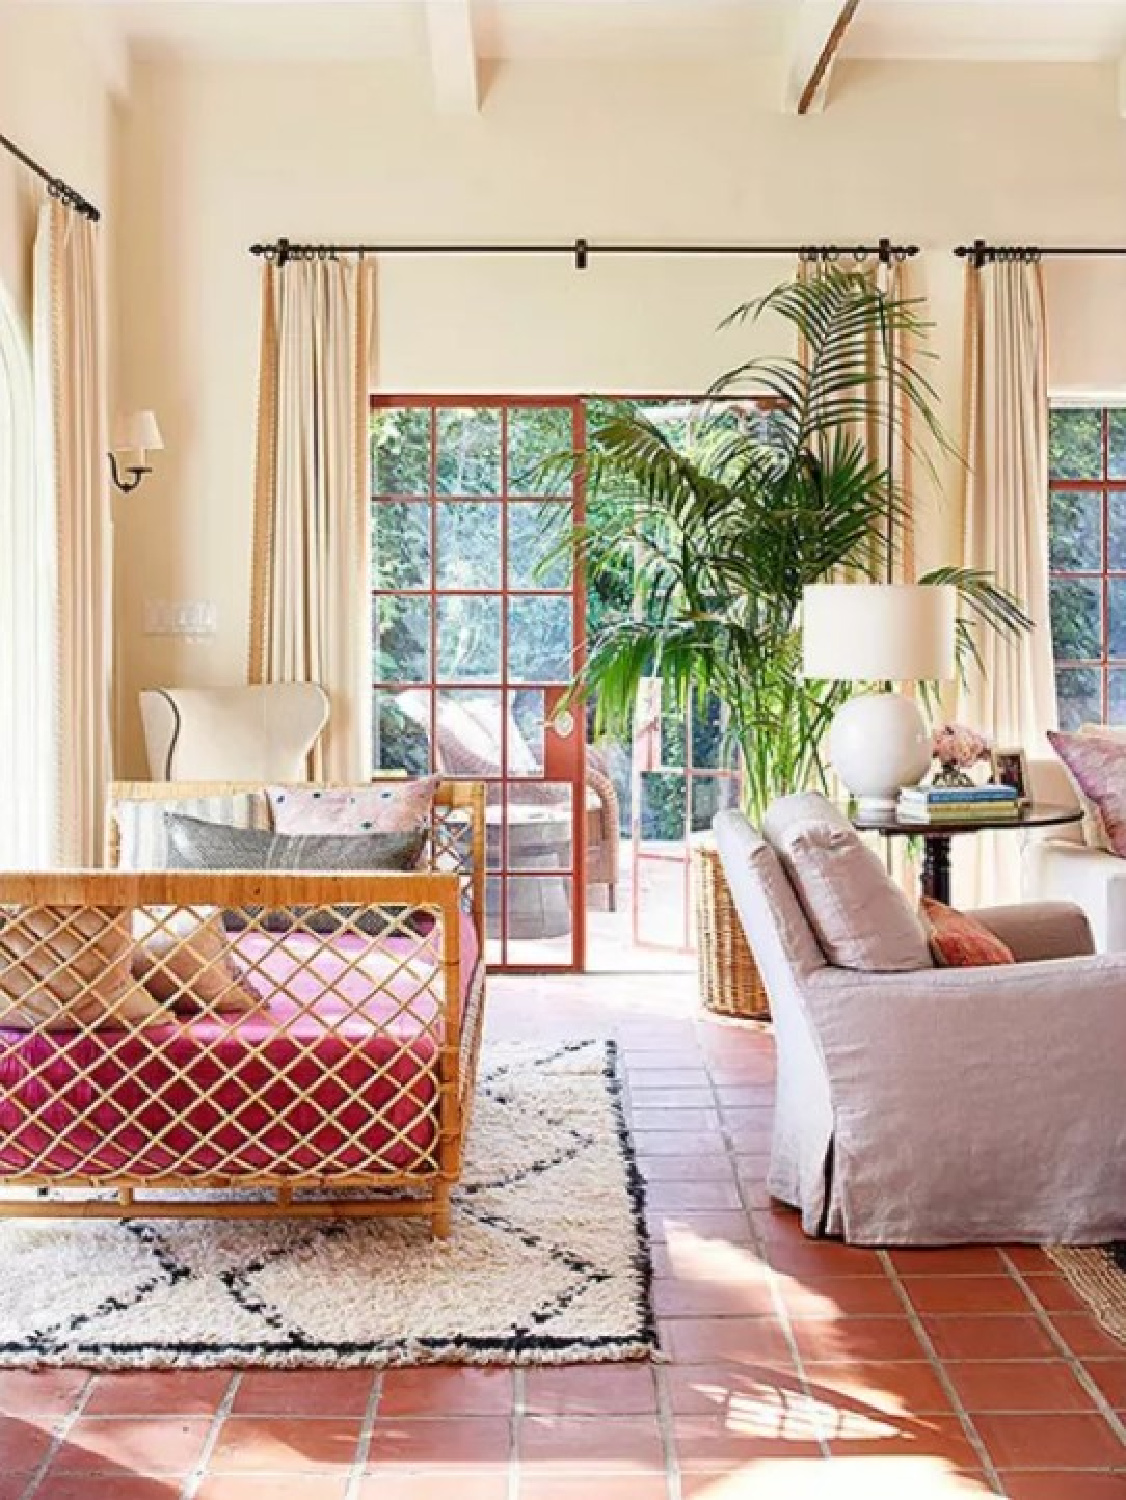 Home Again movie living room set - Open Road films starring Reese Witherspoon; director: Hallie Meyers; producer: Nancy Meyers; photo: Amy Neunsinger. #californiacool #moviesets #interiordesign